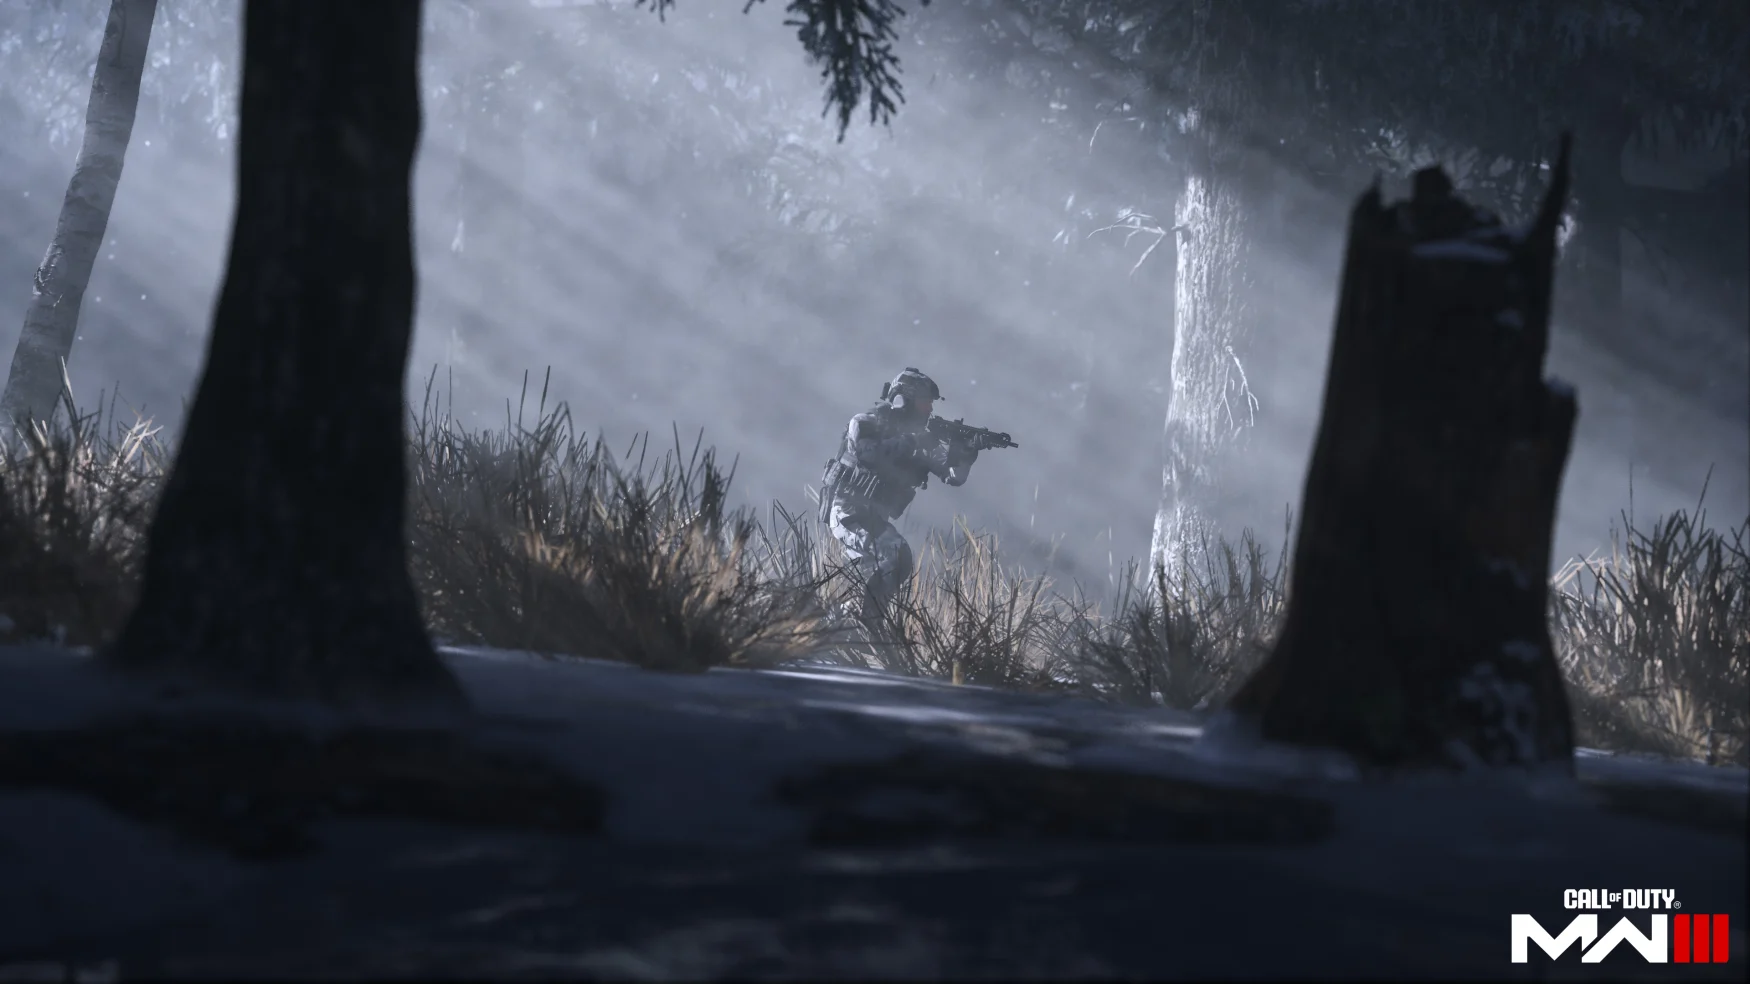 A soldier walks through some woods in Call of Duty: Modern Warfare III's campaign mode.